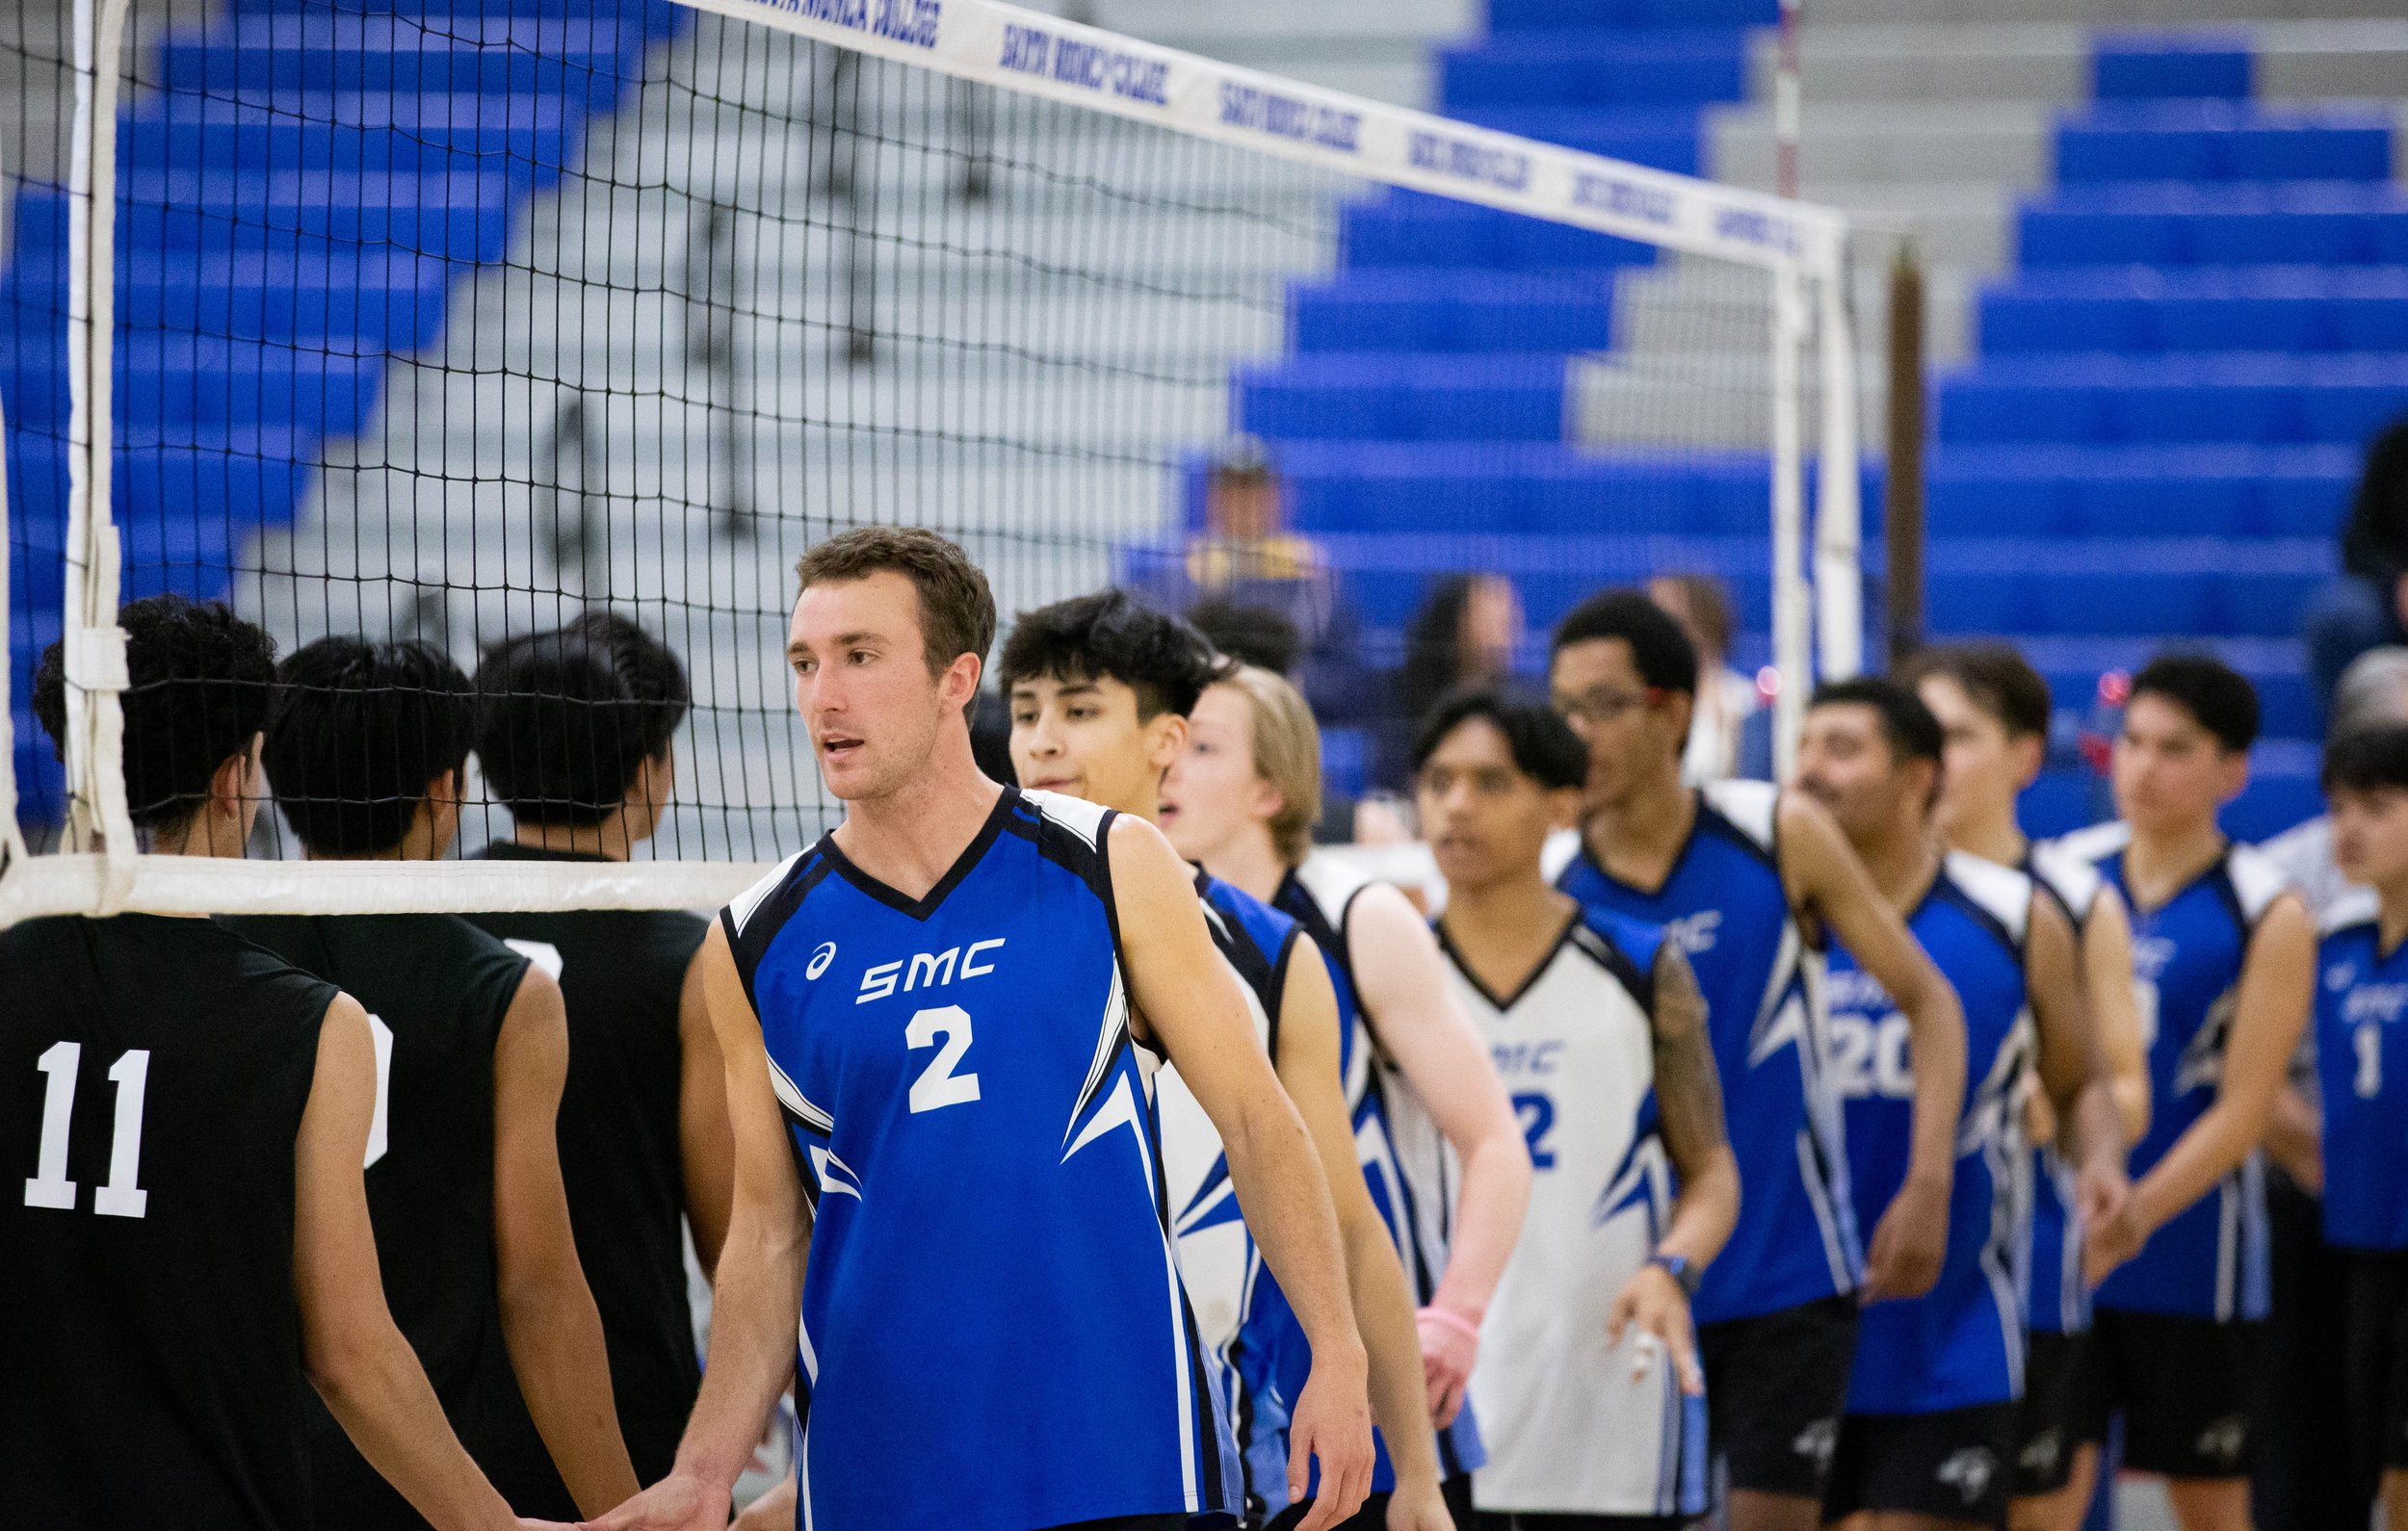  Santa Monica College(SMC) Corsairs and L.A. Pierce College Brahma Bulls in handshake-lines at the end of the game with the Corsairs taking the win 3-0 on Wed. March 15, 2023 in the SMC Pavillion at Santa Monica, Calif. (Danilo Perez | The Corsair) 